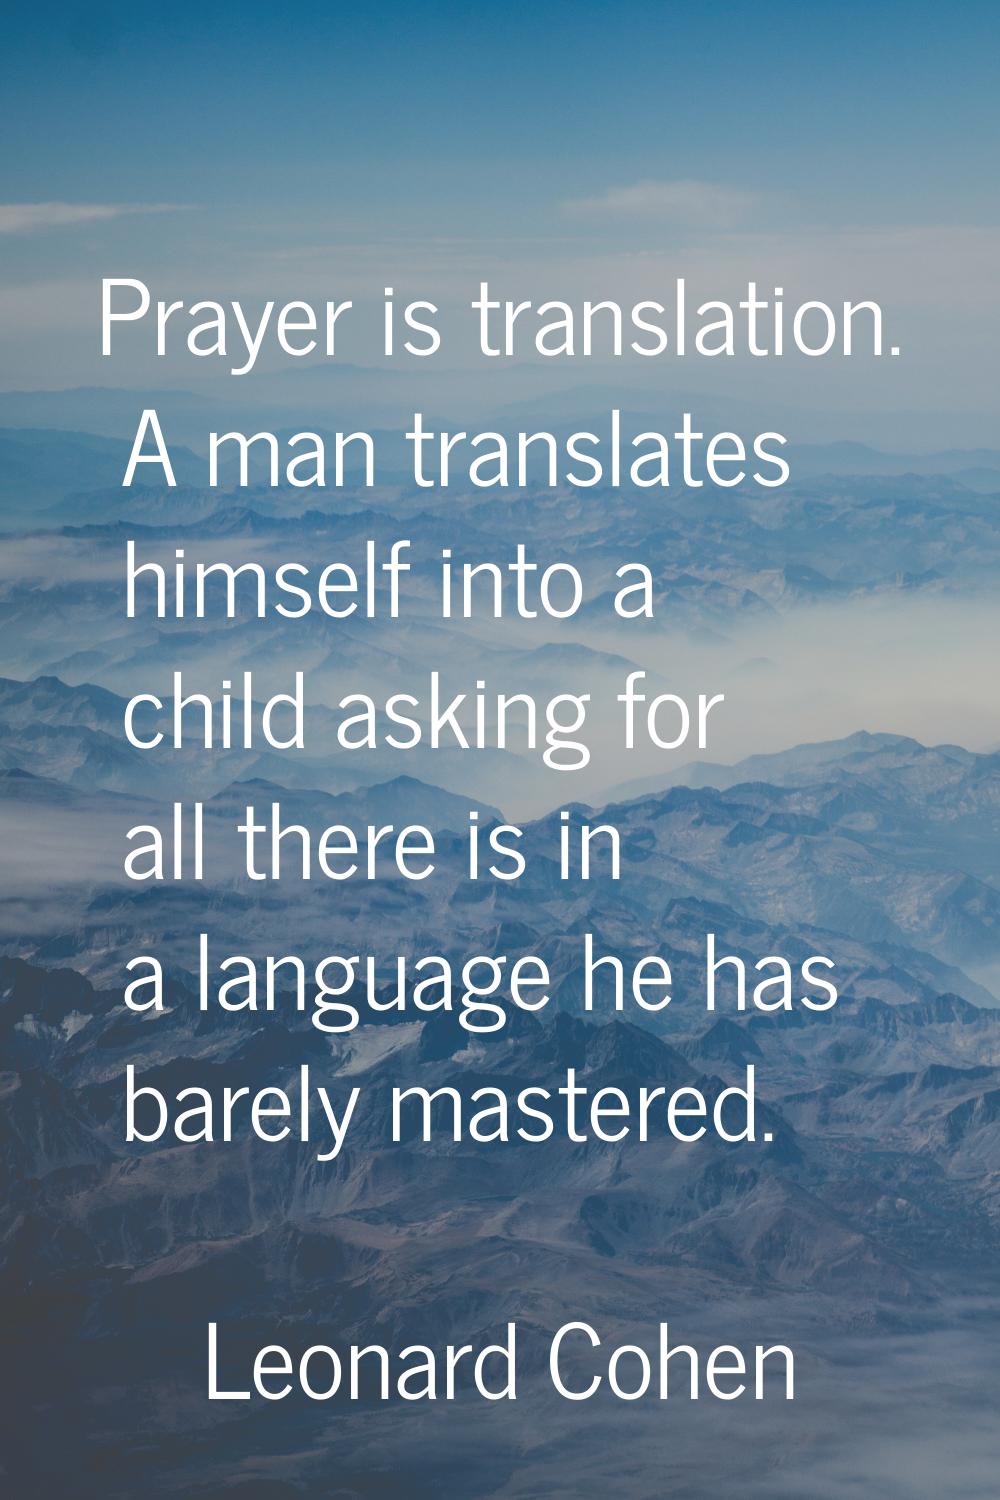 Prayer is translation. A man translates himself into a child asking for all there is in a language 